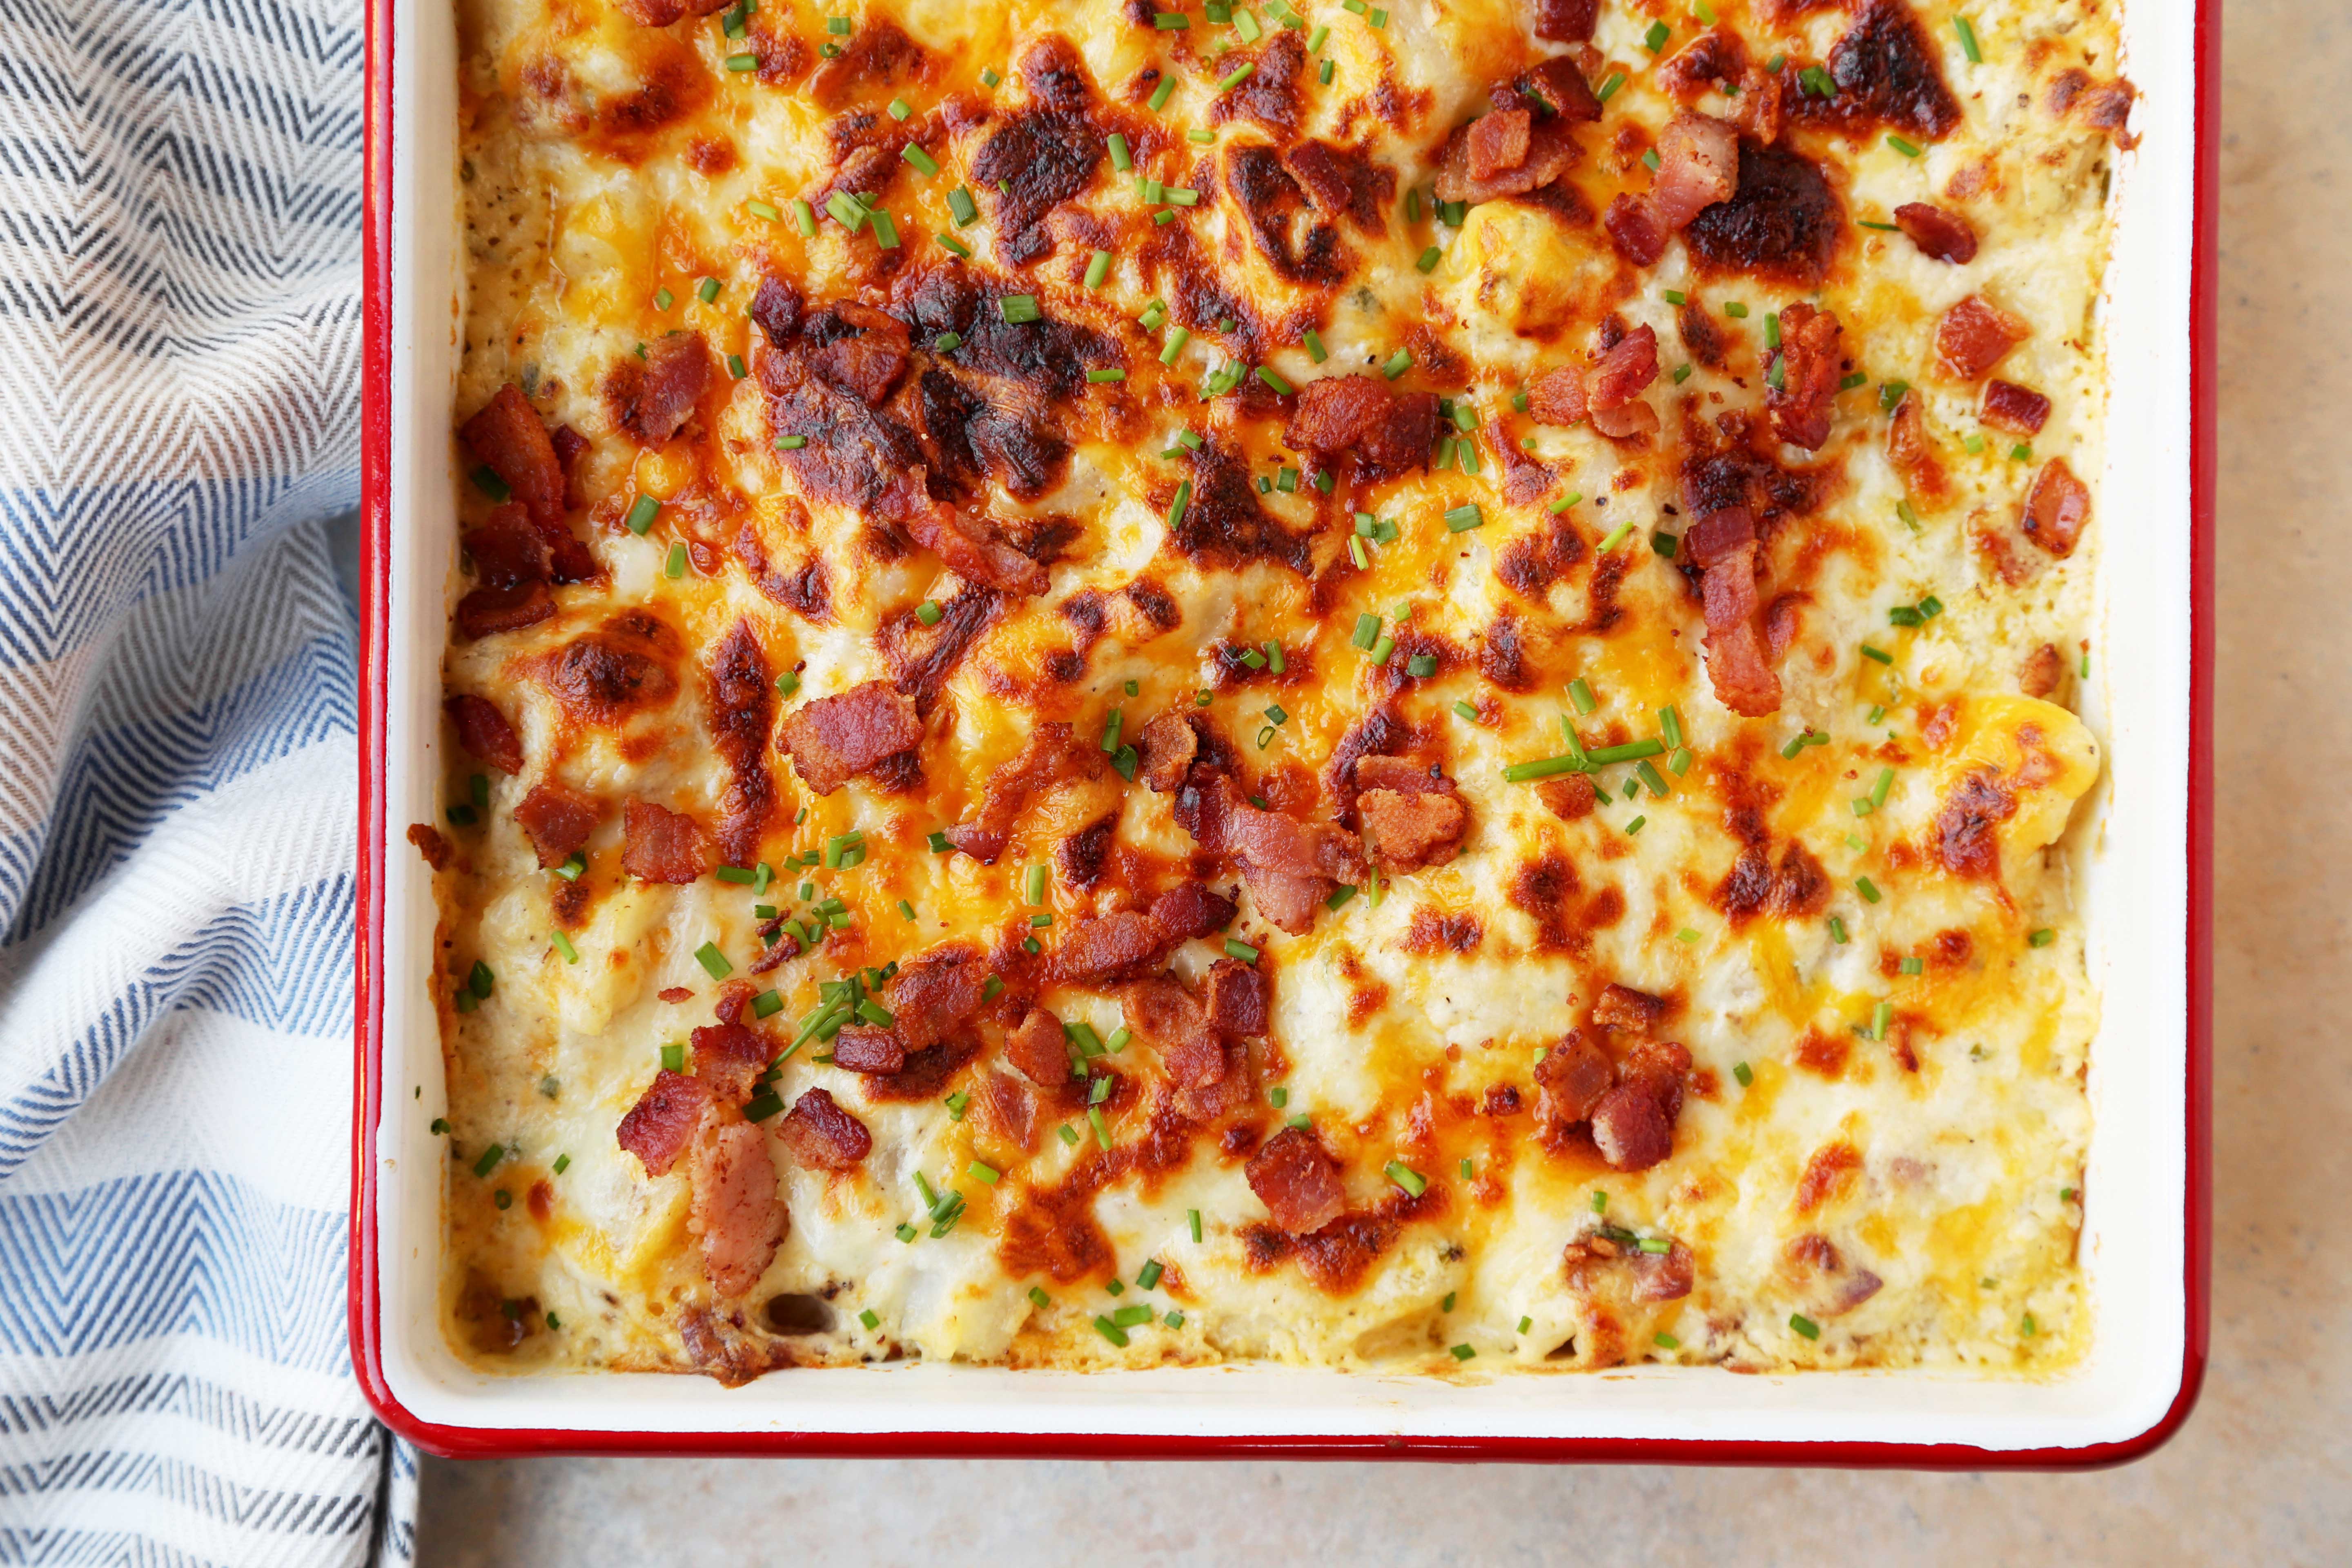 Loaded Baked Potato Casserole - The Candid Appetite